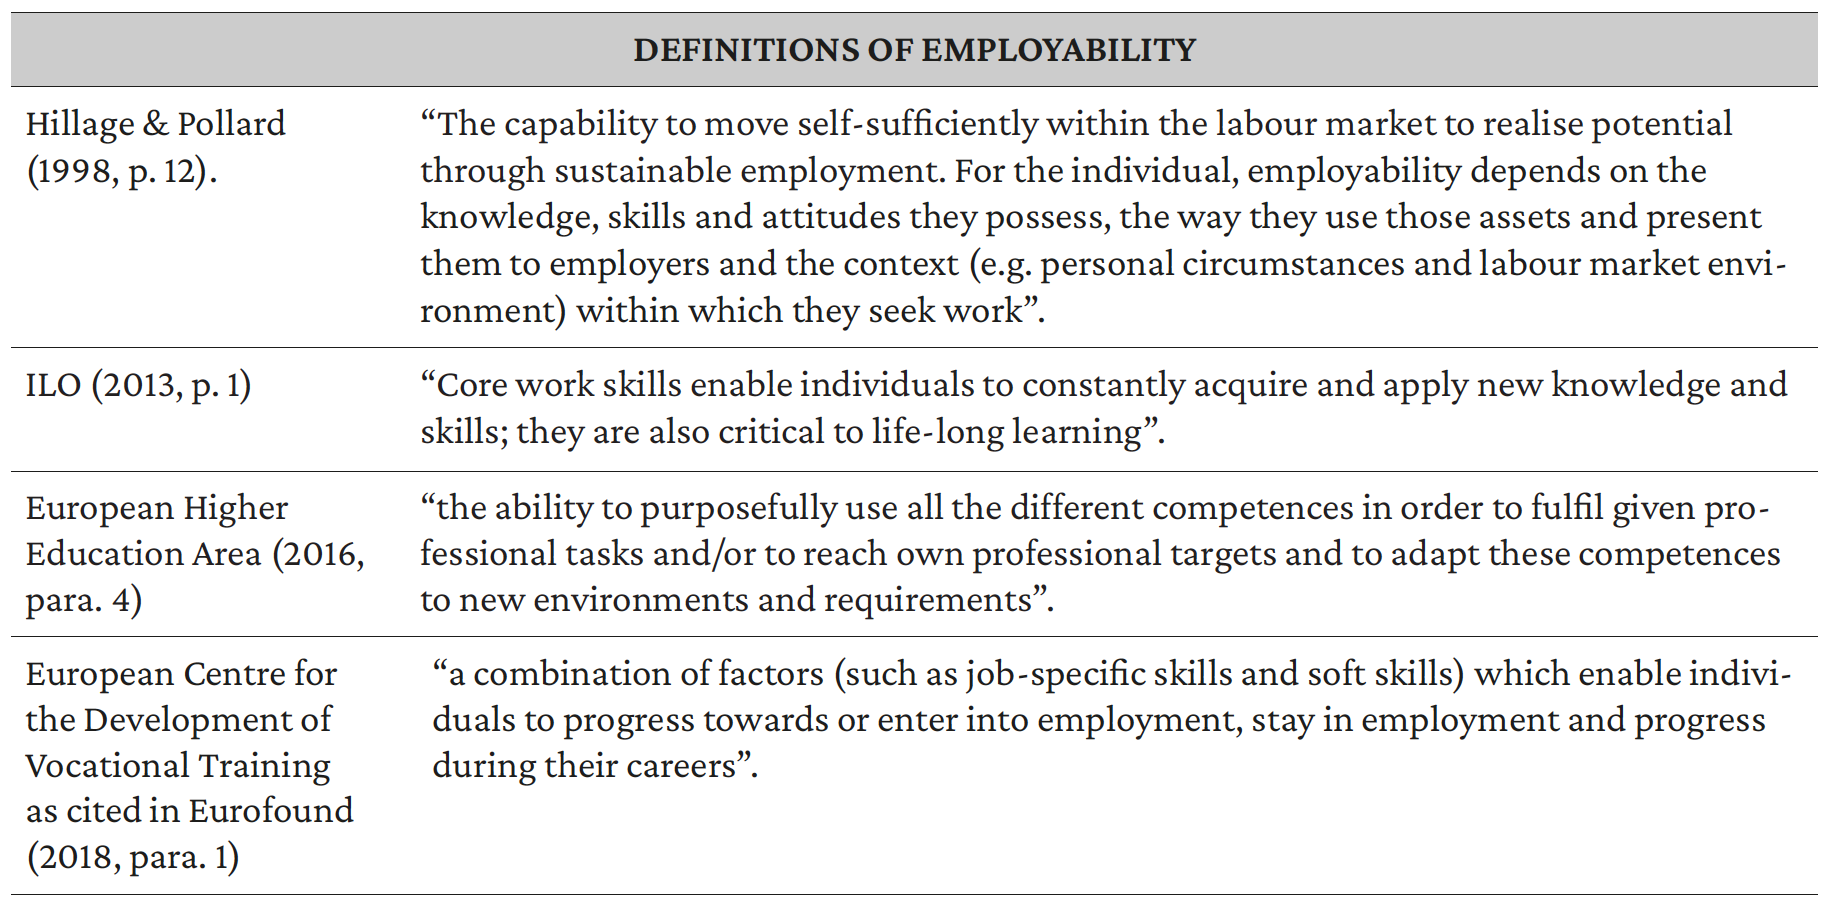 Table 1. Definitions of employability.